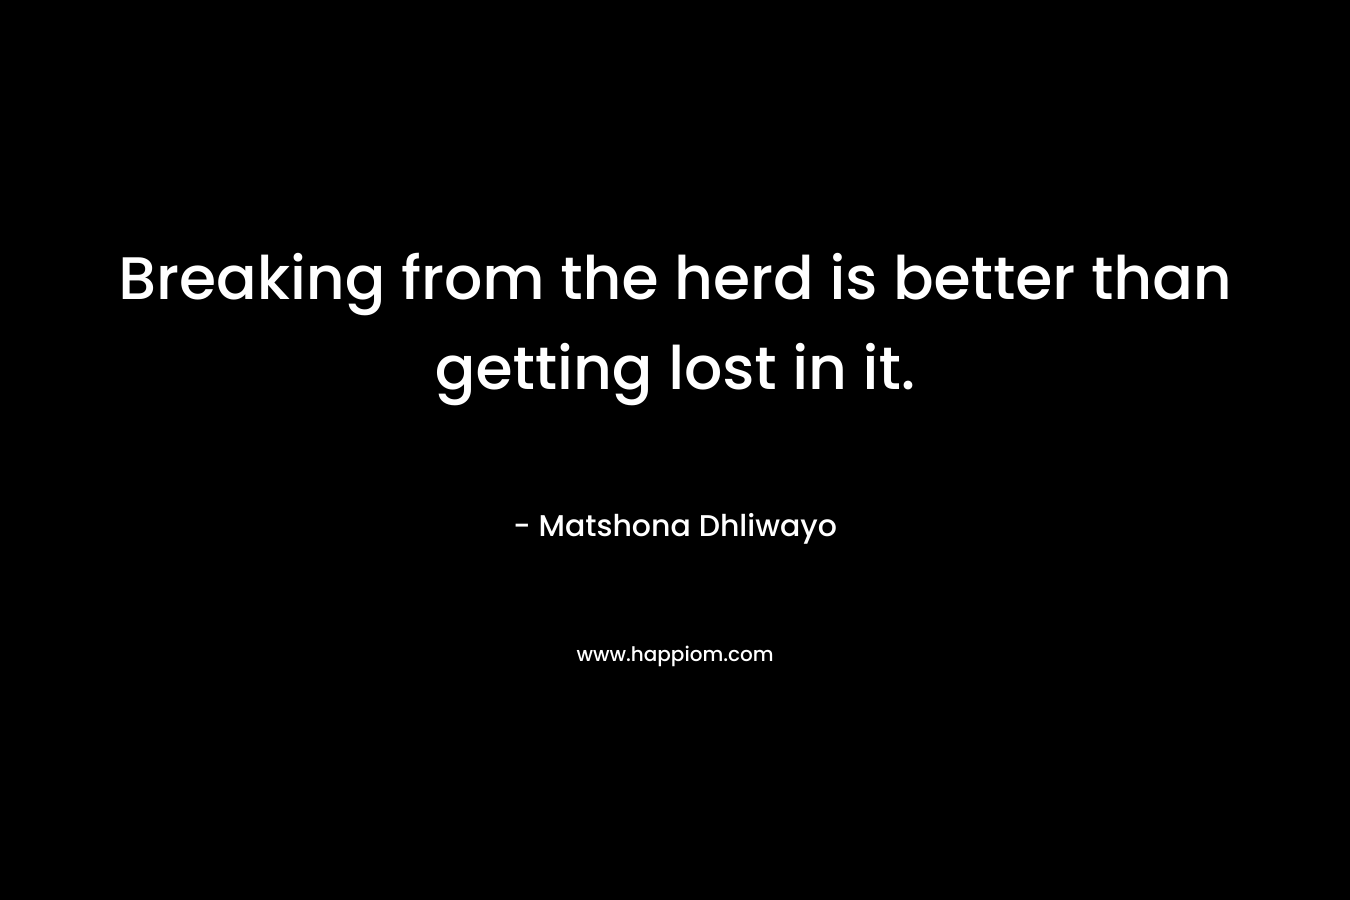 Breaking from the herd is better than getting lost in it.